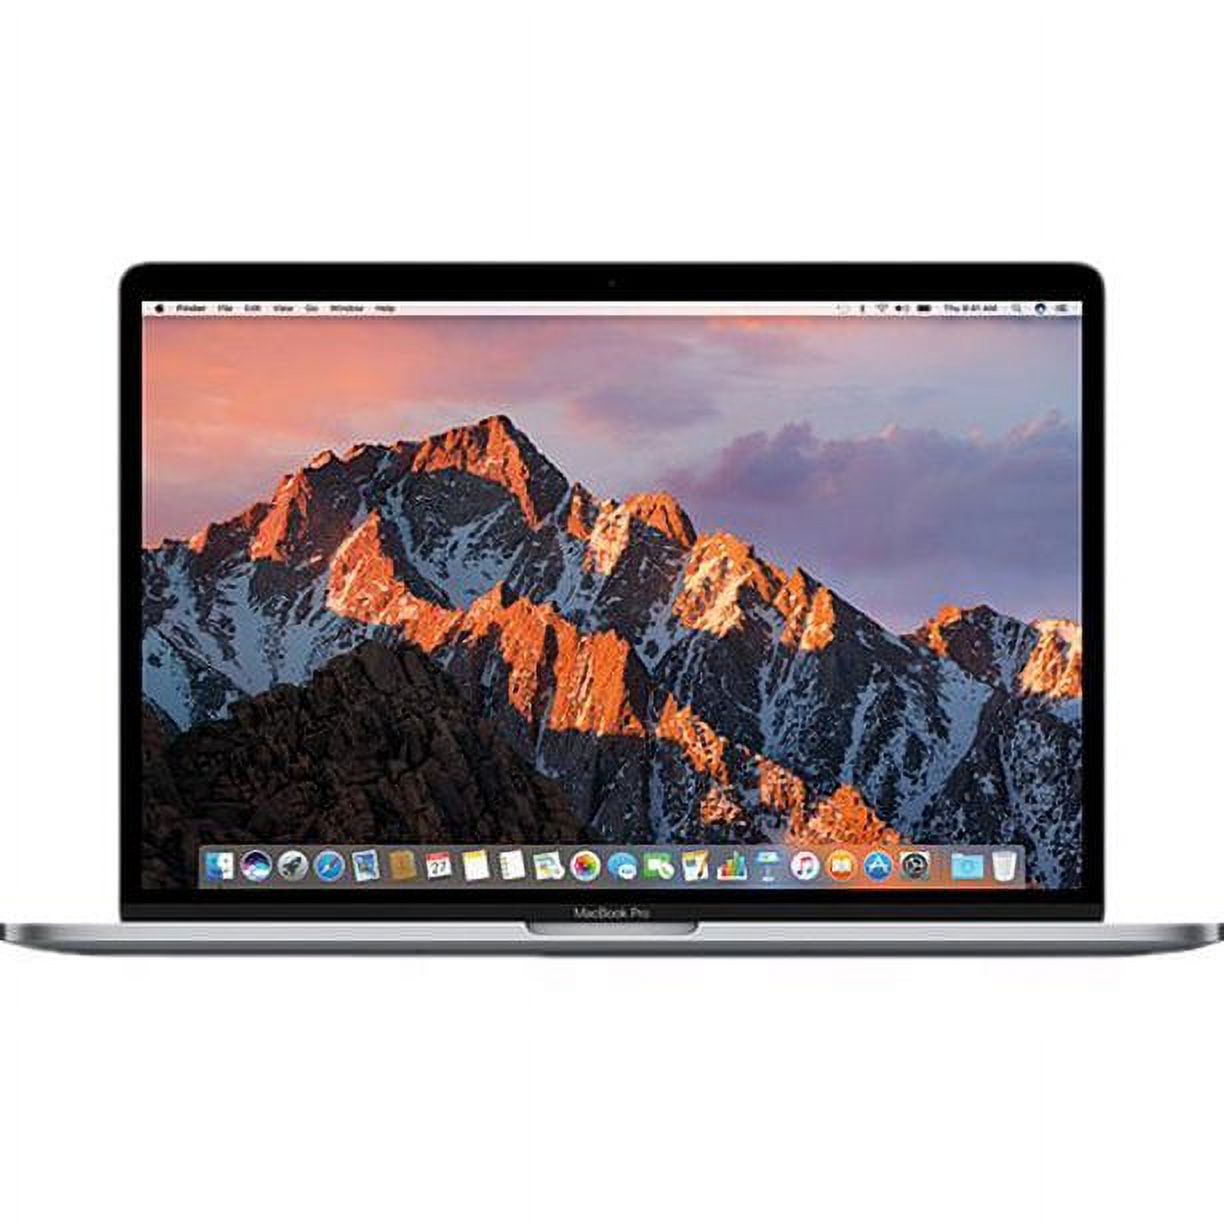 Restored MacBook pro 15.4" Touch Bar MPTR2LL/A 2017 Core i7 2.8GHz 16 GB RAM 256 GB SSD Osx Catalina (Refurbished) - image 1 of 4